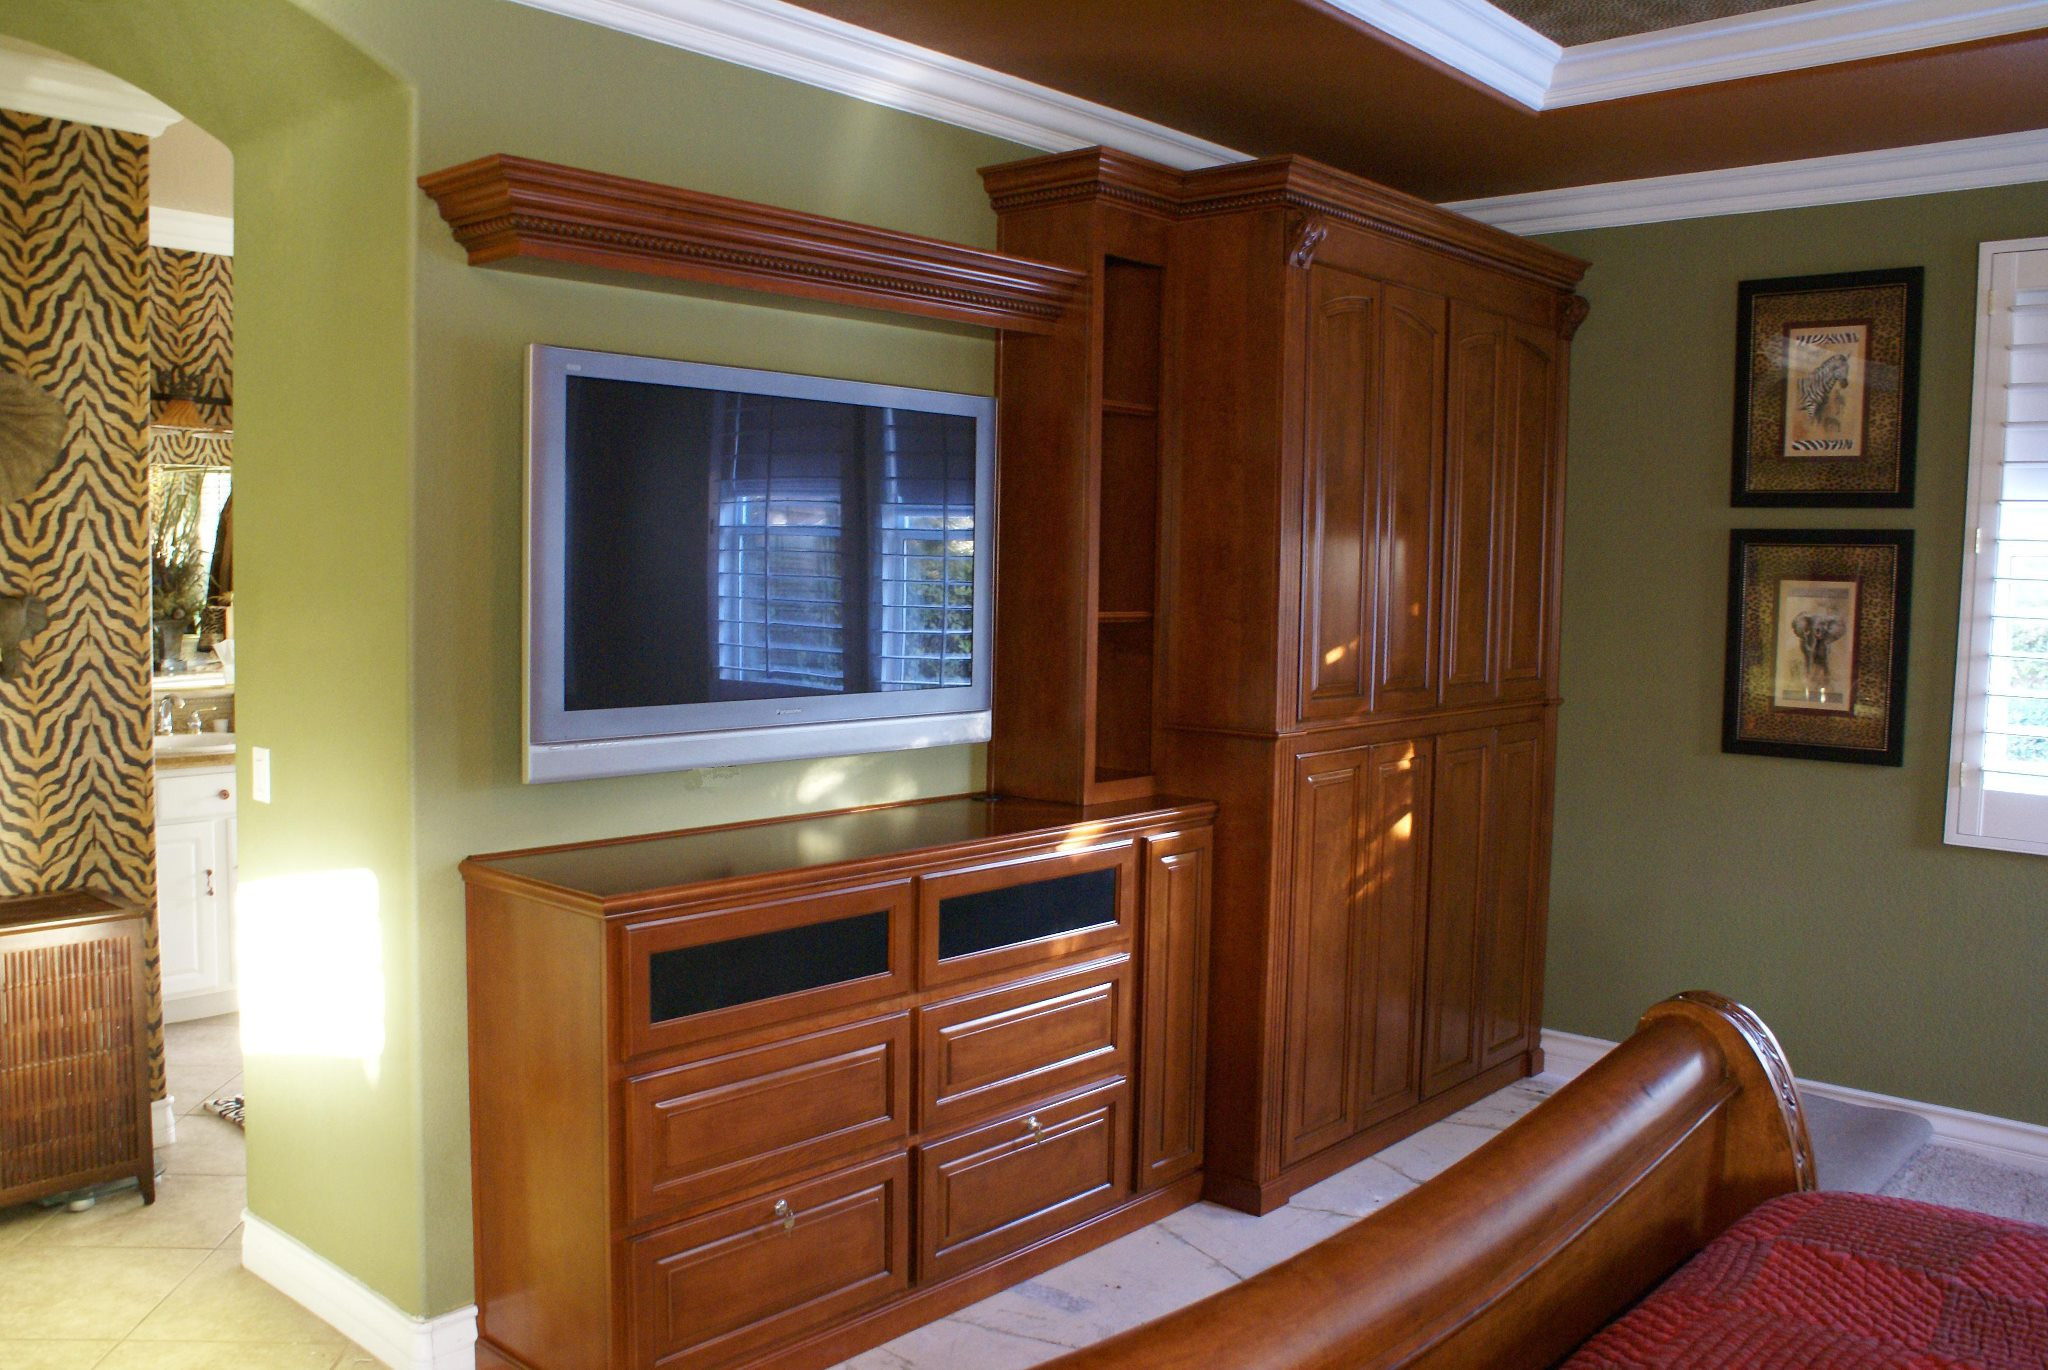 Cabinet For Bedroom
 Bedroom cabinets • Platinum Cabinetry in Las Vegas Nevada